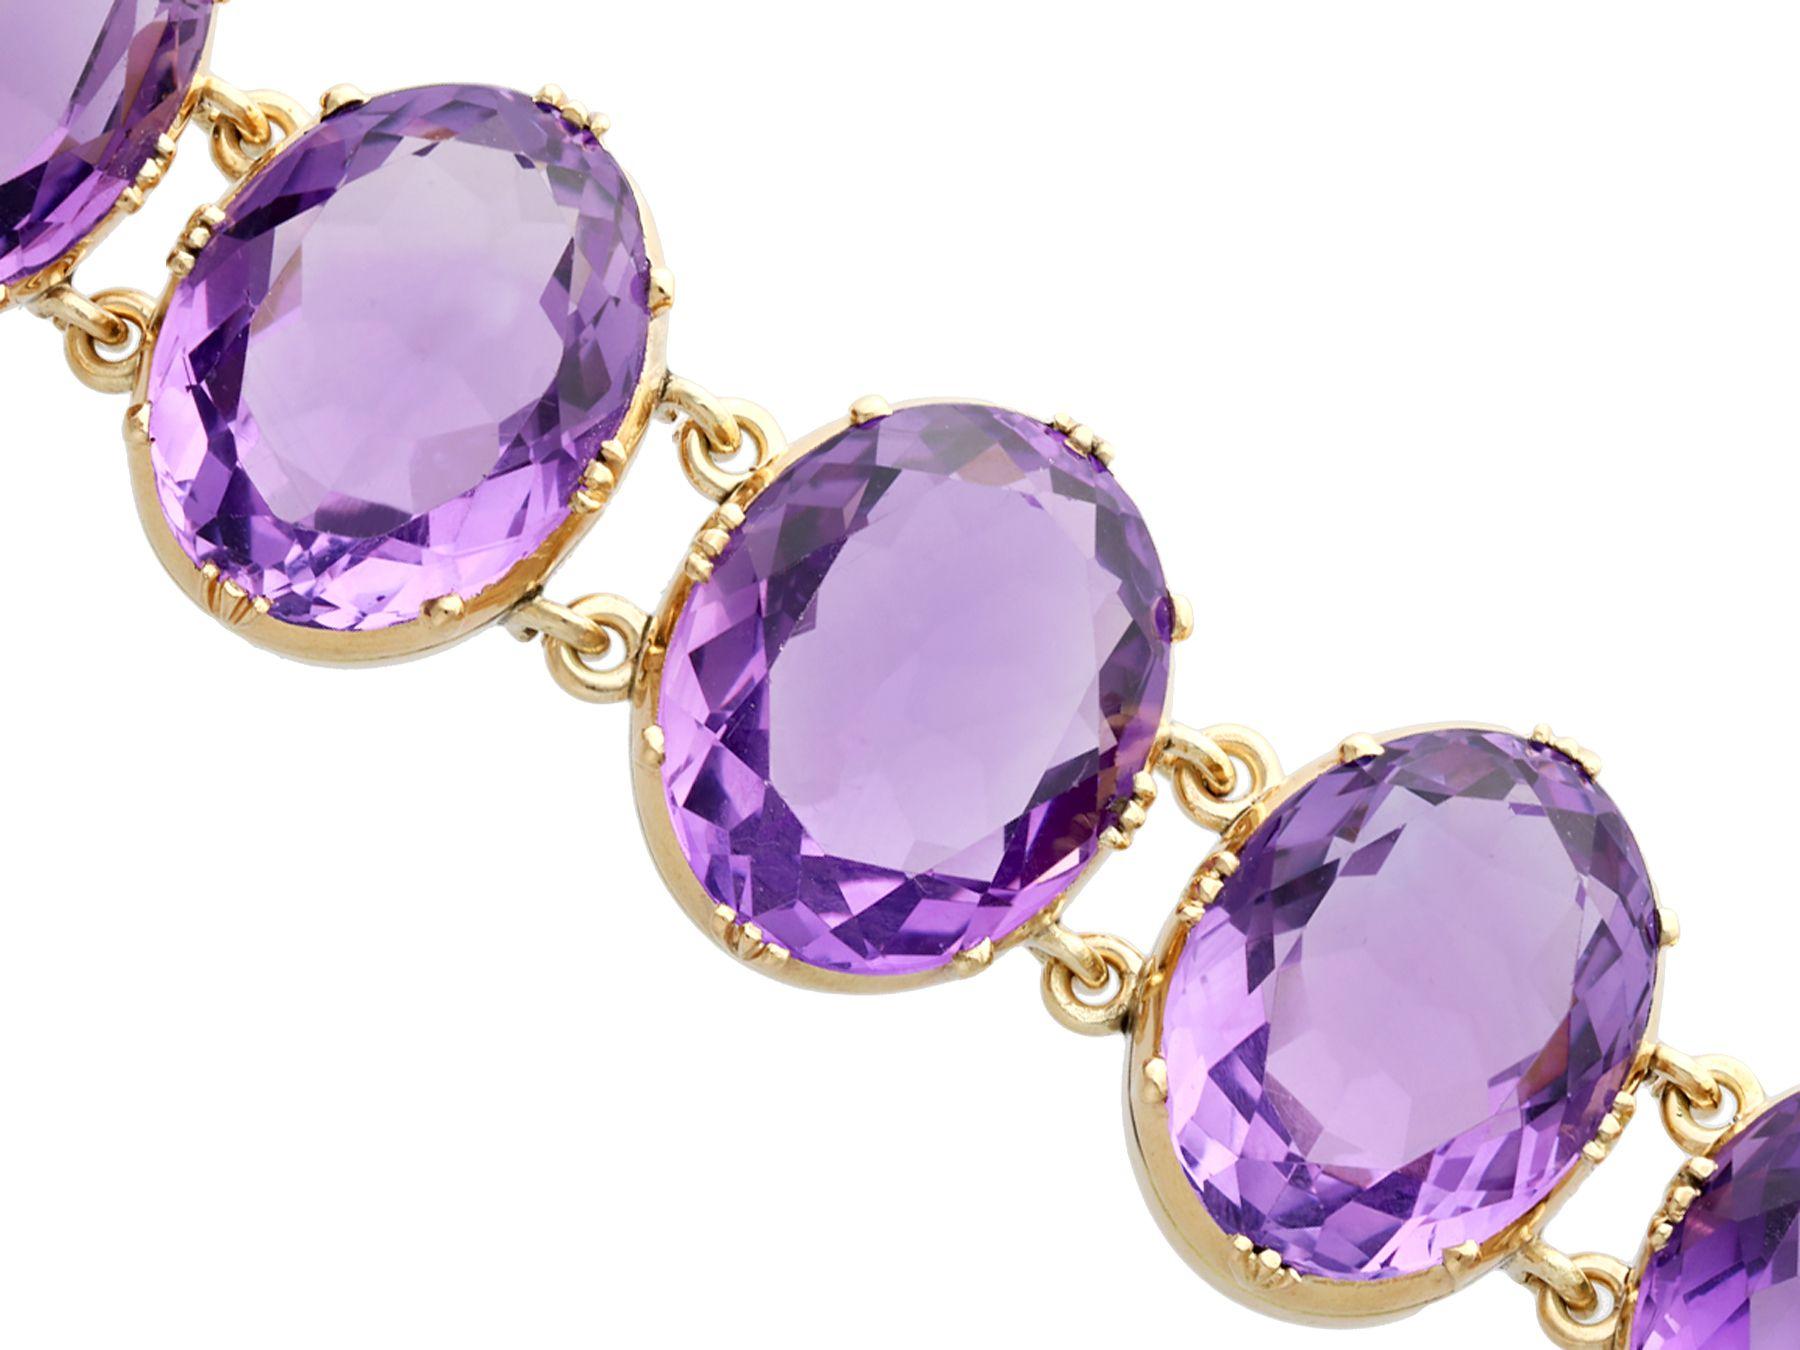 Oval Cut Victorian 193.38 Carat Amethyst and Yellow Gold Bracelet